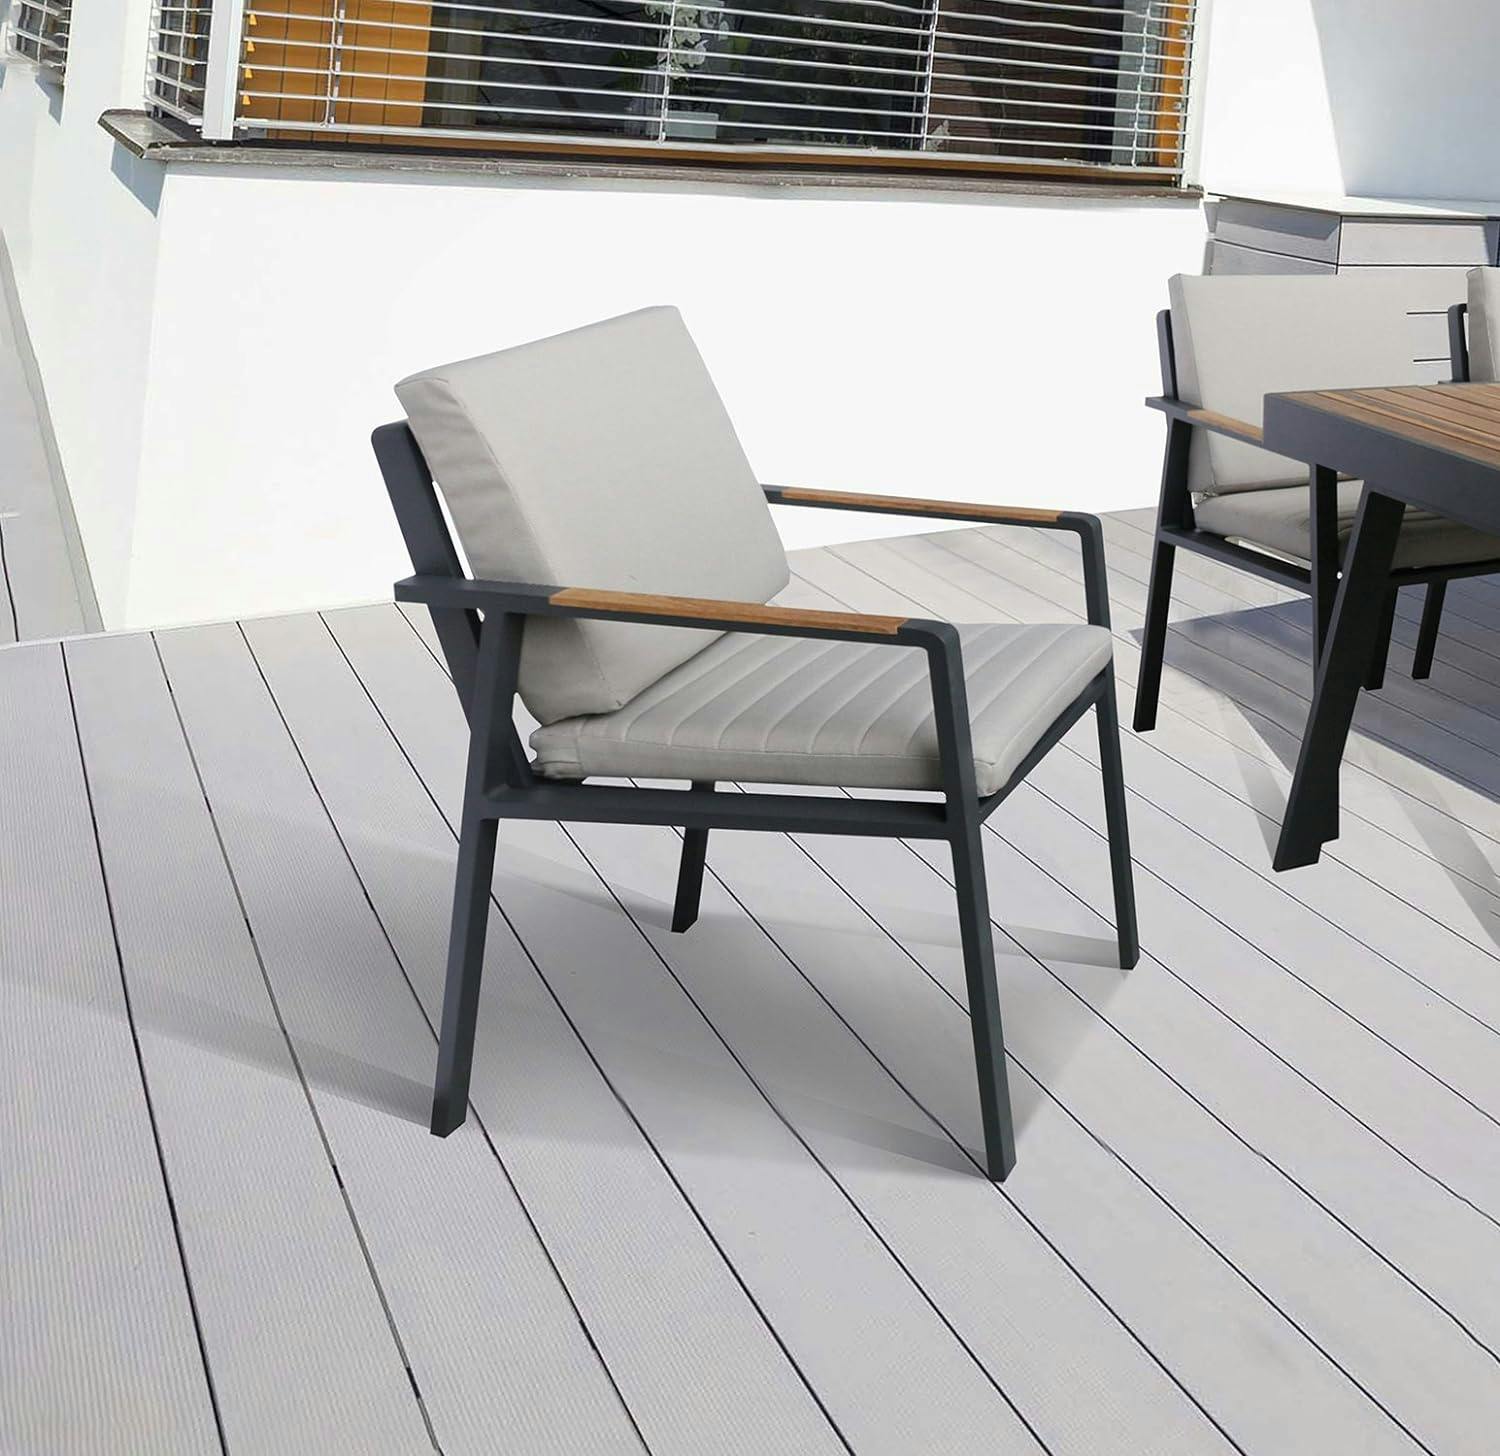 Charcoal and Taupe Outdoor Dining Chair with Teak Wood Accents